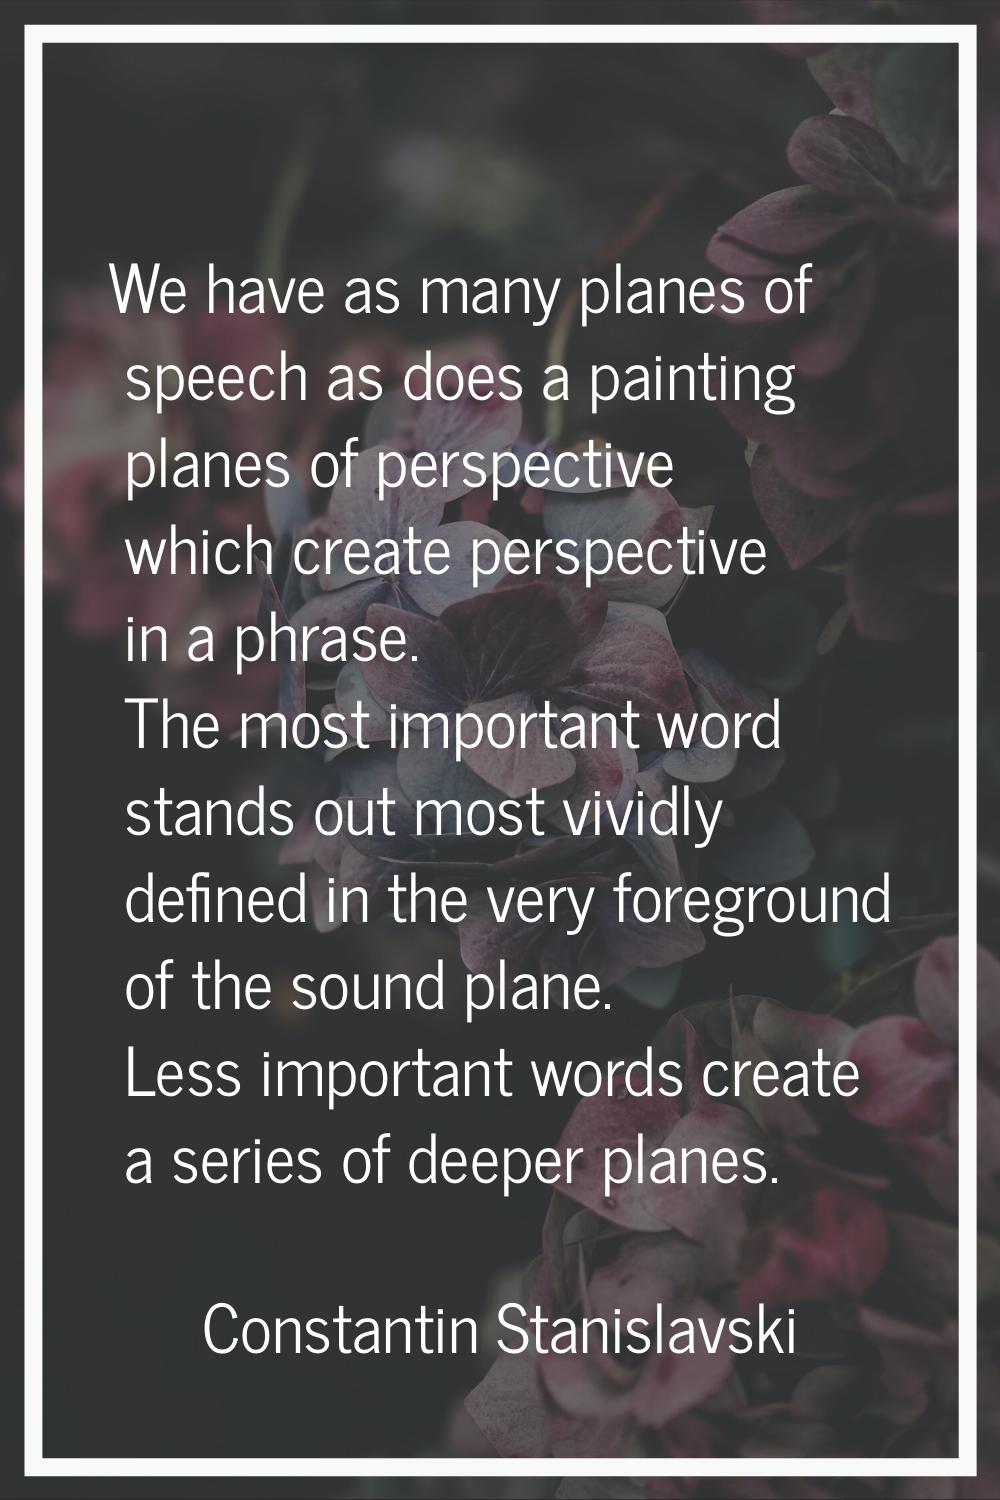 We have as many planes of speech as does a painting planes of perspective which create perspective 